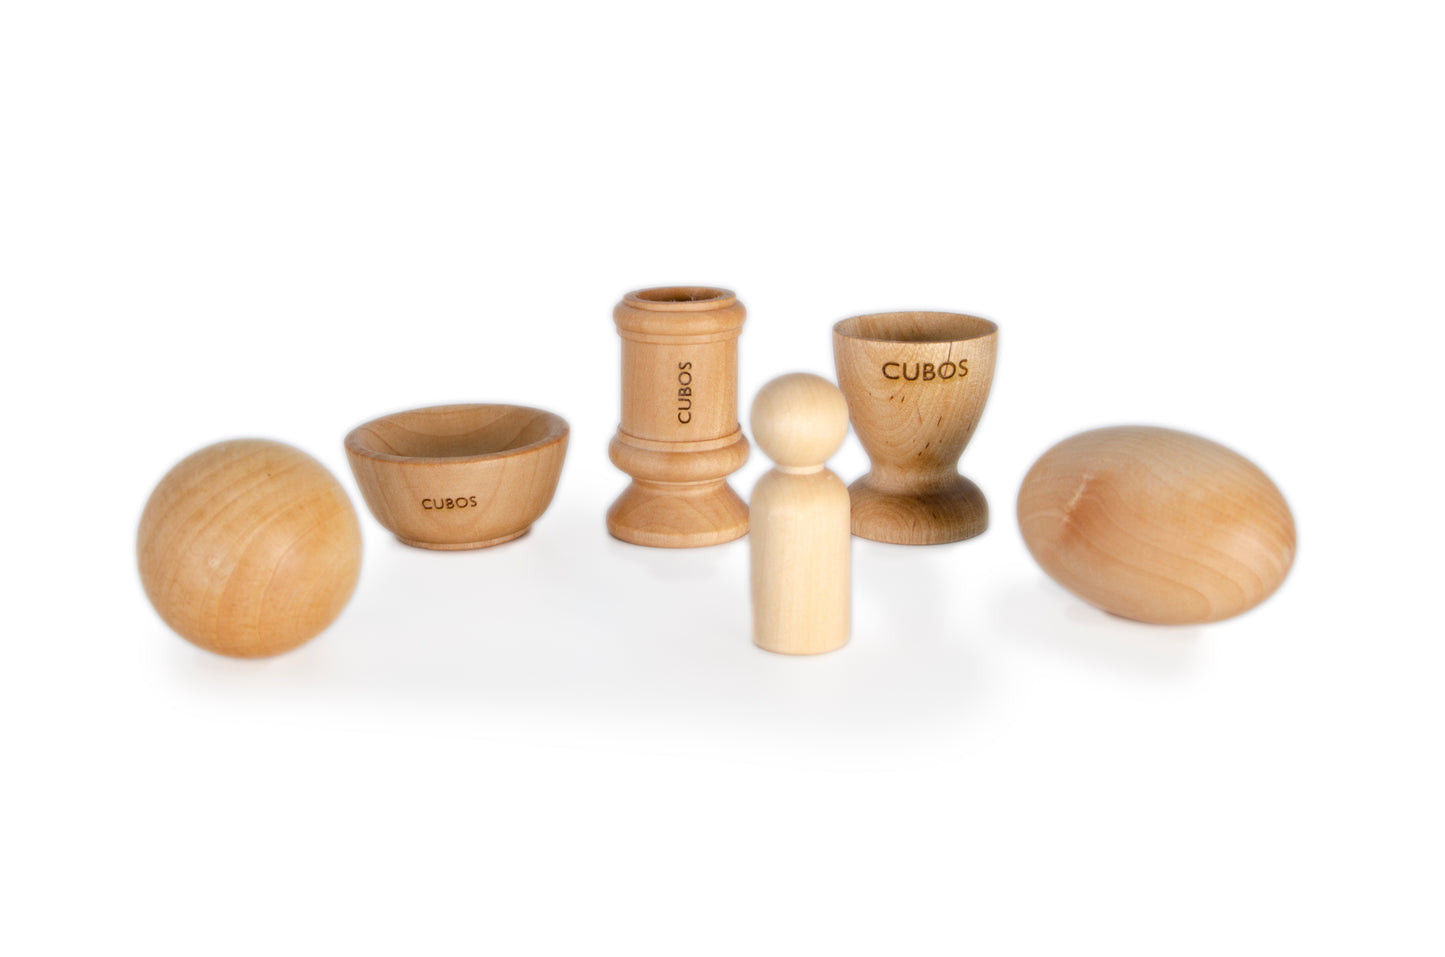 Open Ball, Bowl, Peg, and Egg Cup - A set of wooden sensory toys including a ball, a bowl, a peg, and an egg cup, offering tactile exploration and fine motor skill development in Montessori education